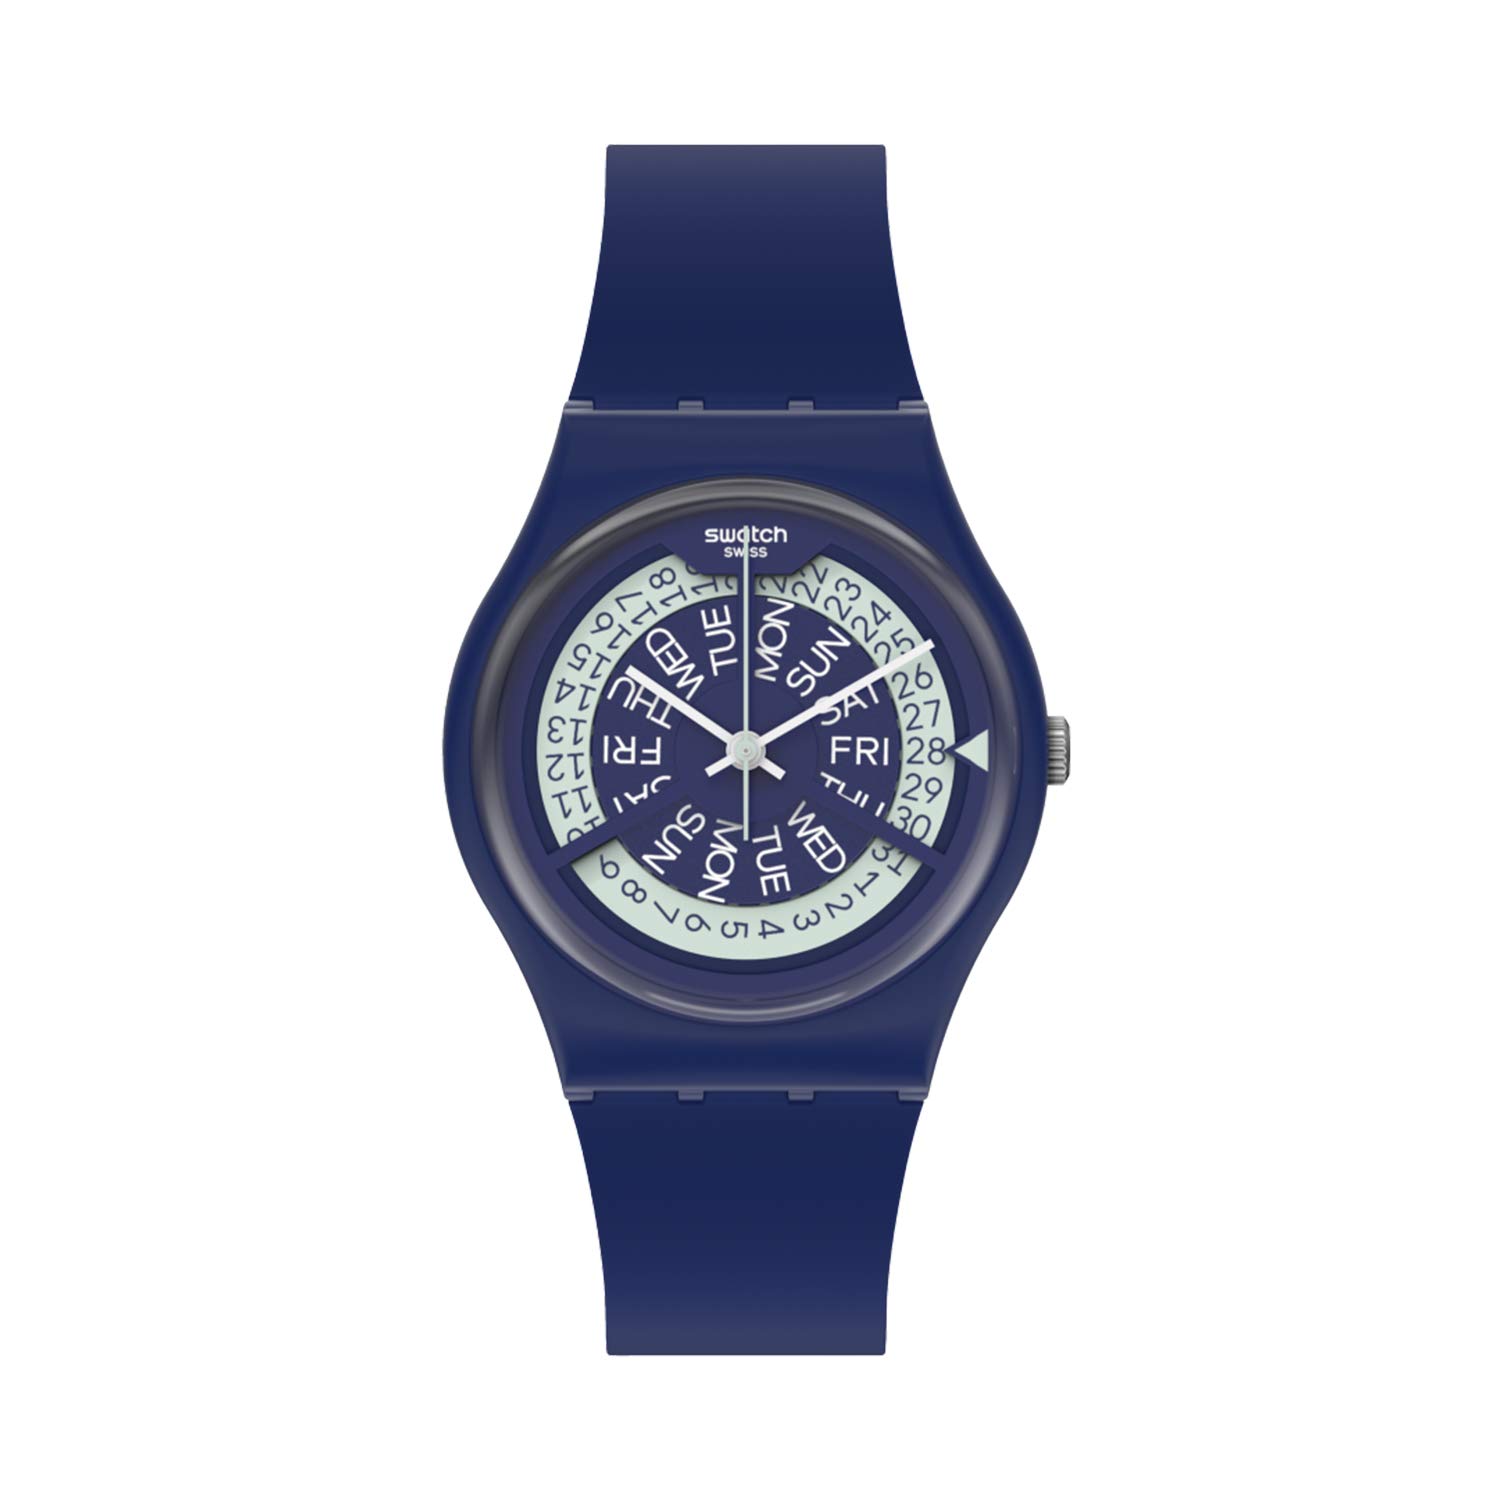 Swatch N-IGMA NAVY Ladies Watch GN727